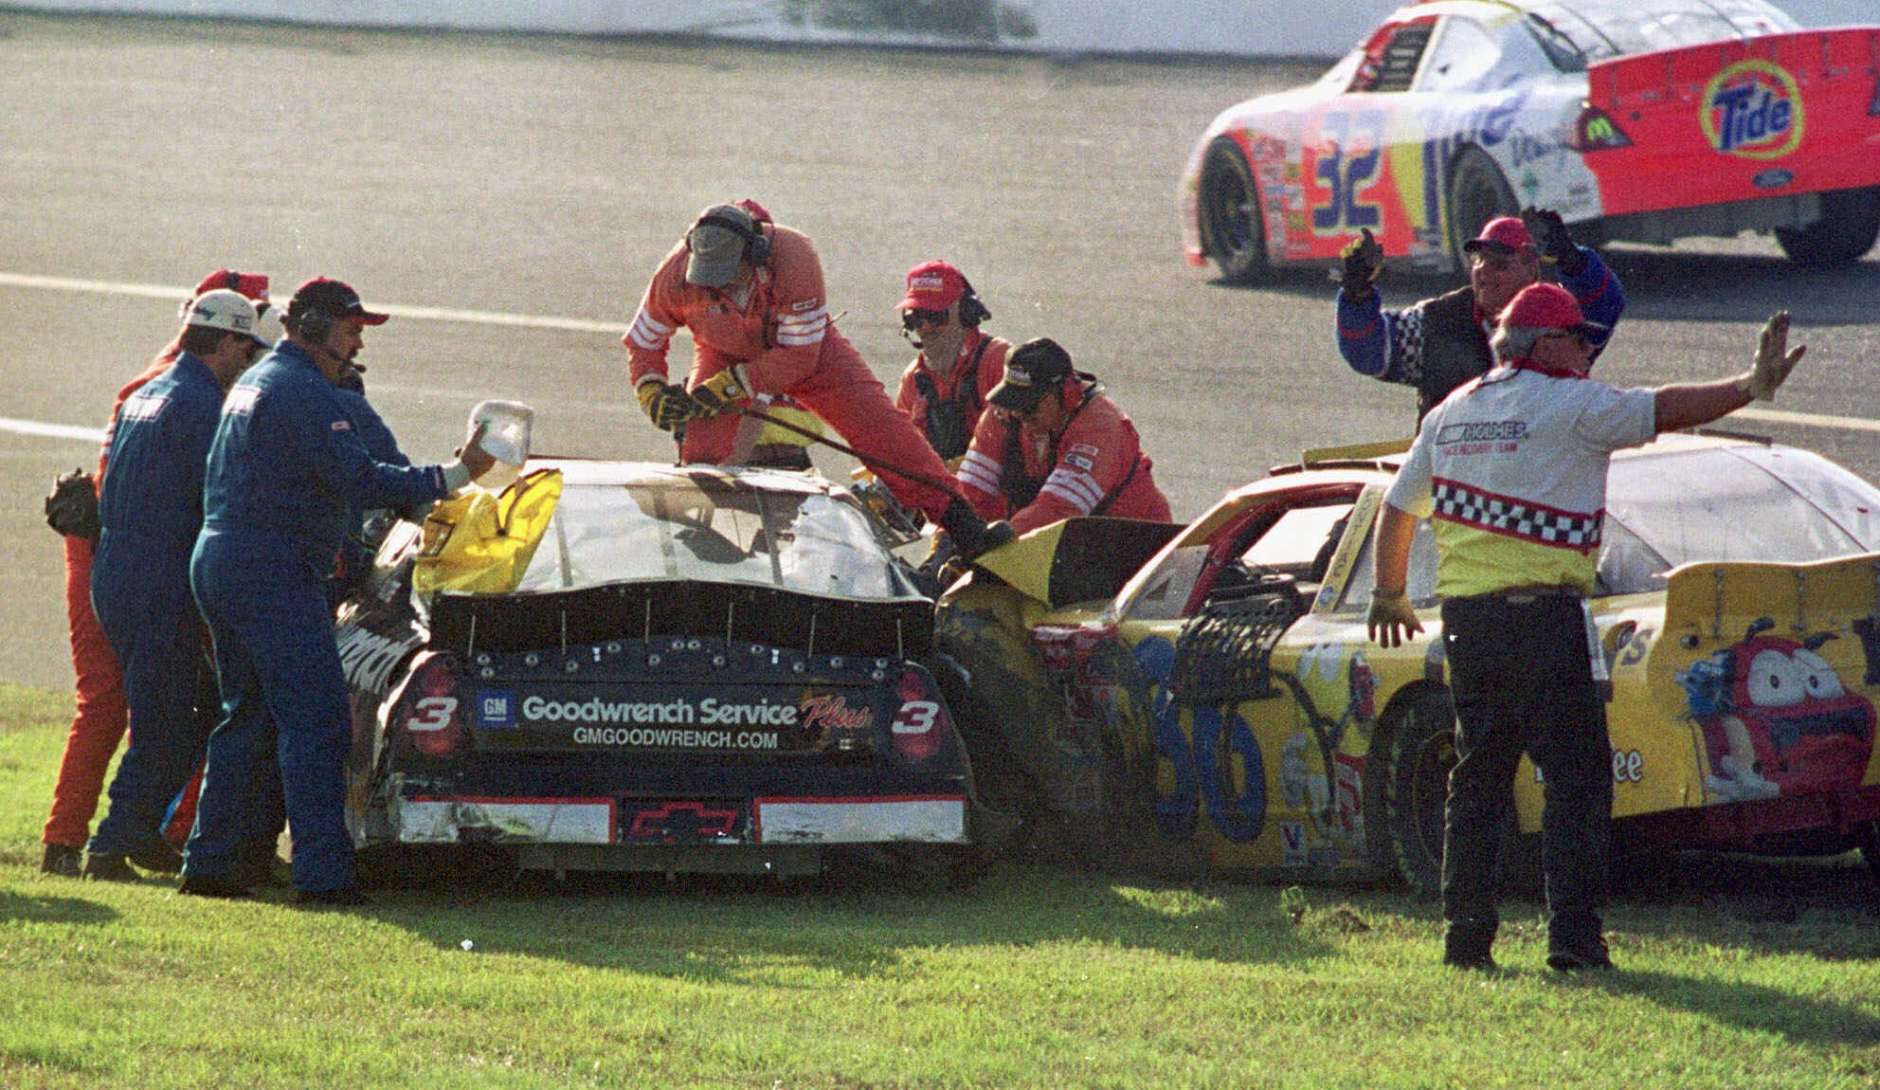 Workers try to remove Dale Earnhardt (3) from his vehicle after a crash also involving Ken Schrader (36) during the Daytona 500 in this Feb. 18, 2001photo at the Daytona International Speedway in Daytona Beach, Fla. Earnhart was killed in the crash. (AP Photo/Greg Suvino)